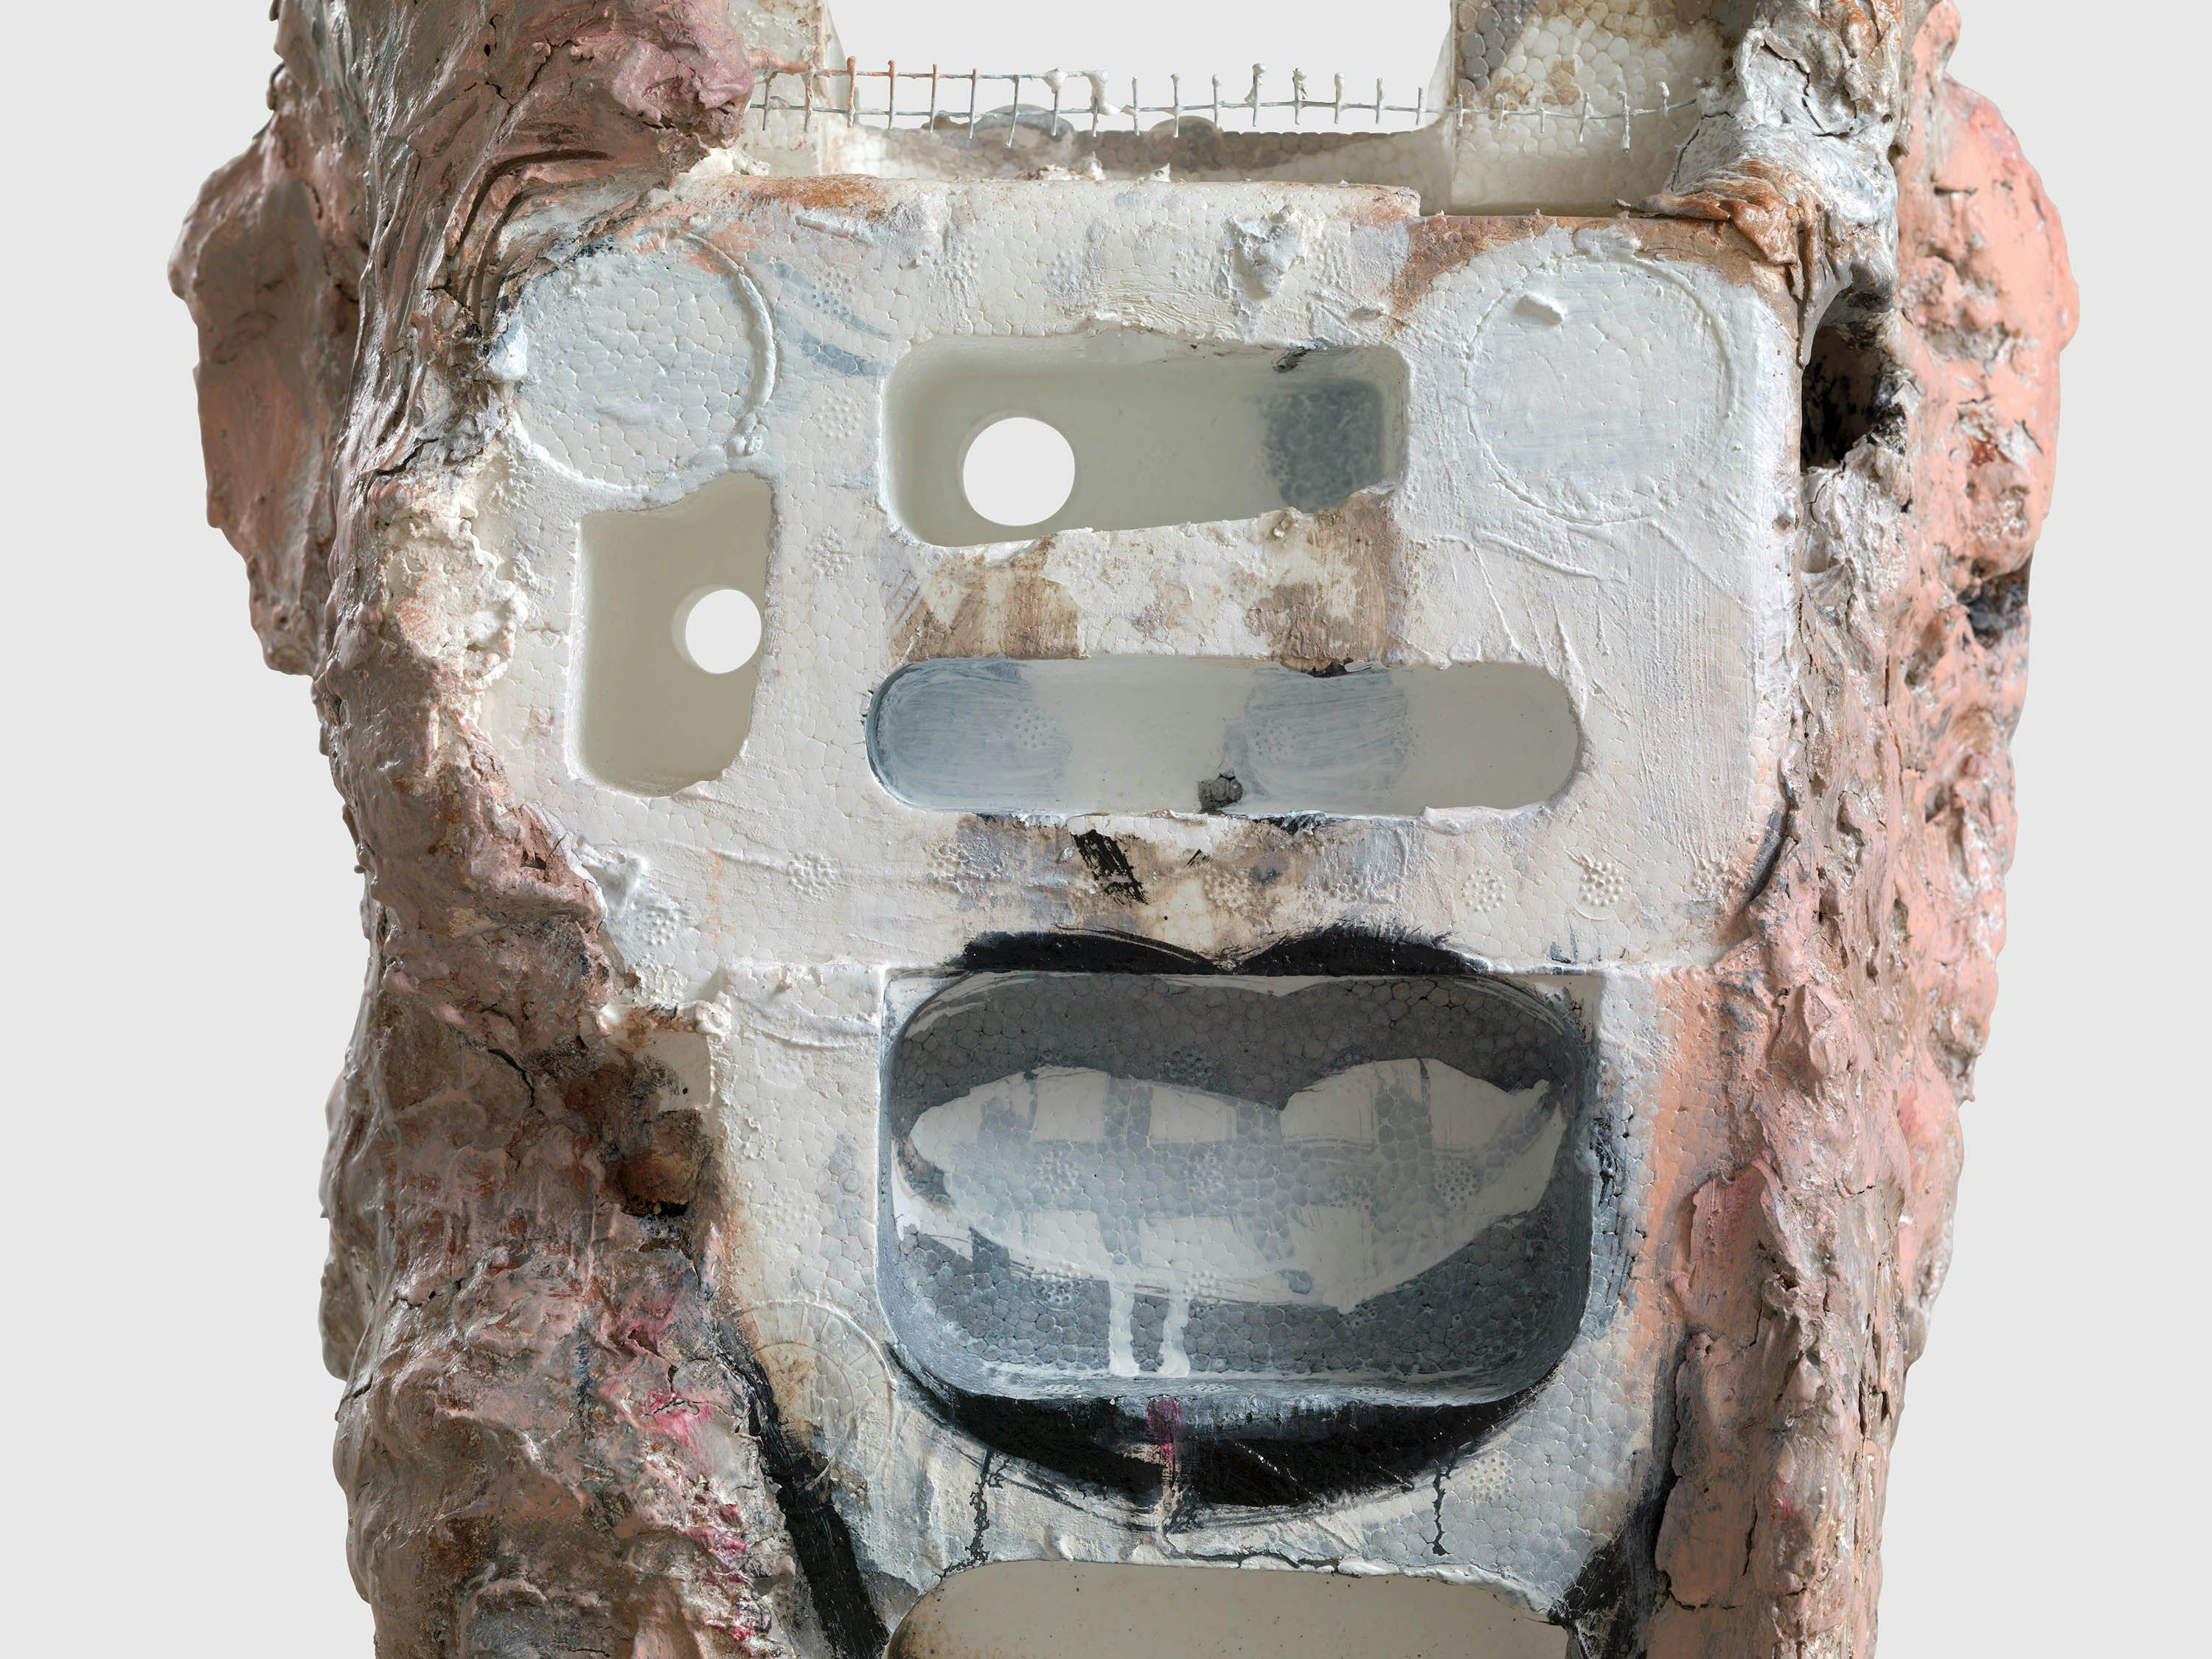 A detail from a mixed media sculpture by Huma Bhabha, titled Lucky, dated 2022.